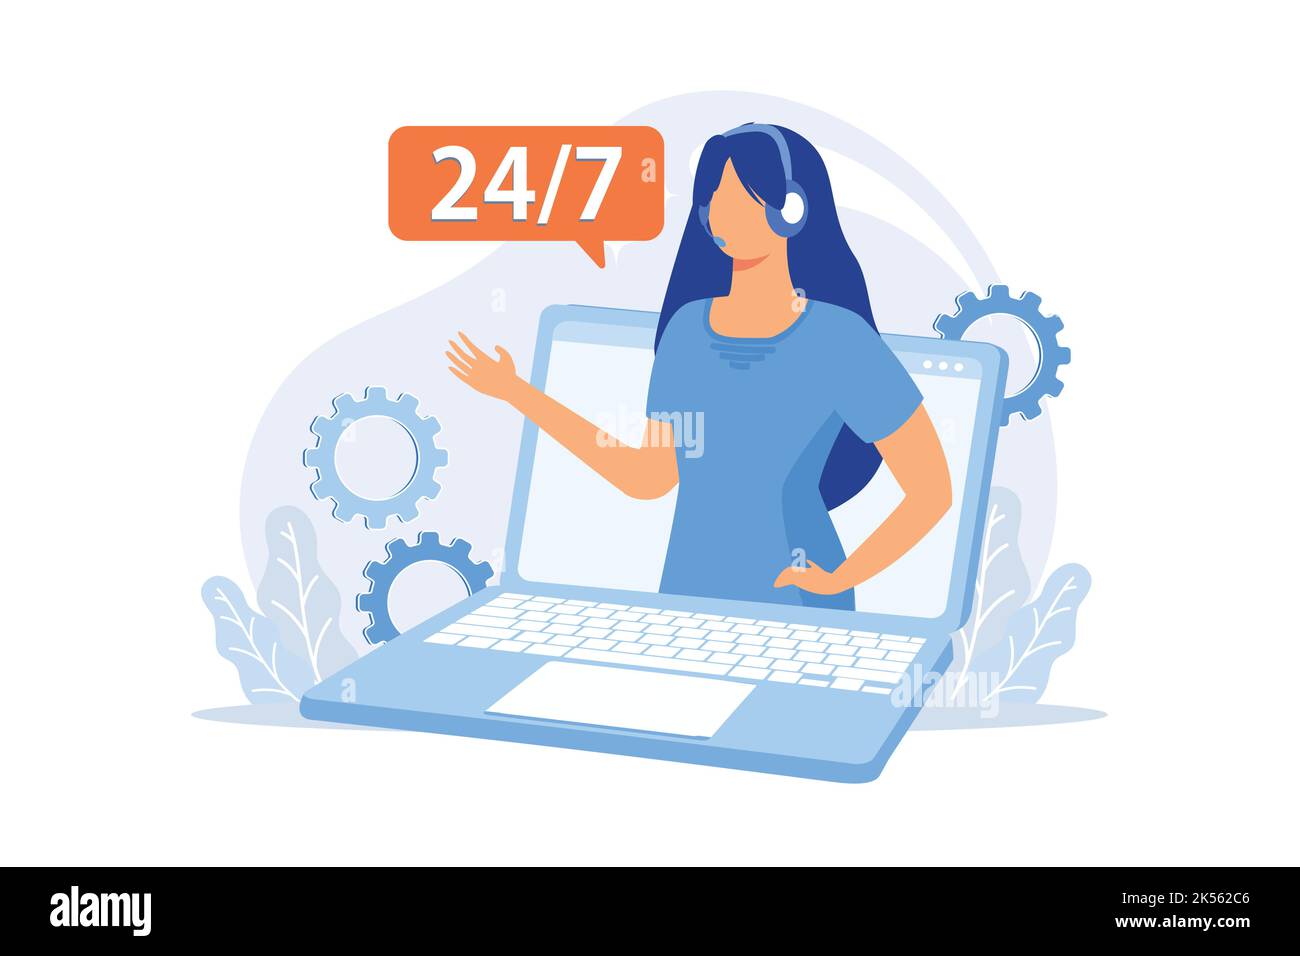 Noctidial technical support. Online assistant, user help, frequently asked questions. Call center worker cartoon character. Woman working at hotline. Stock Vector